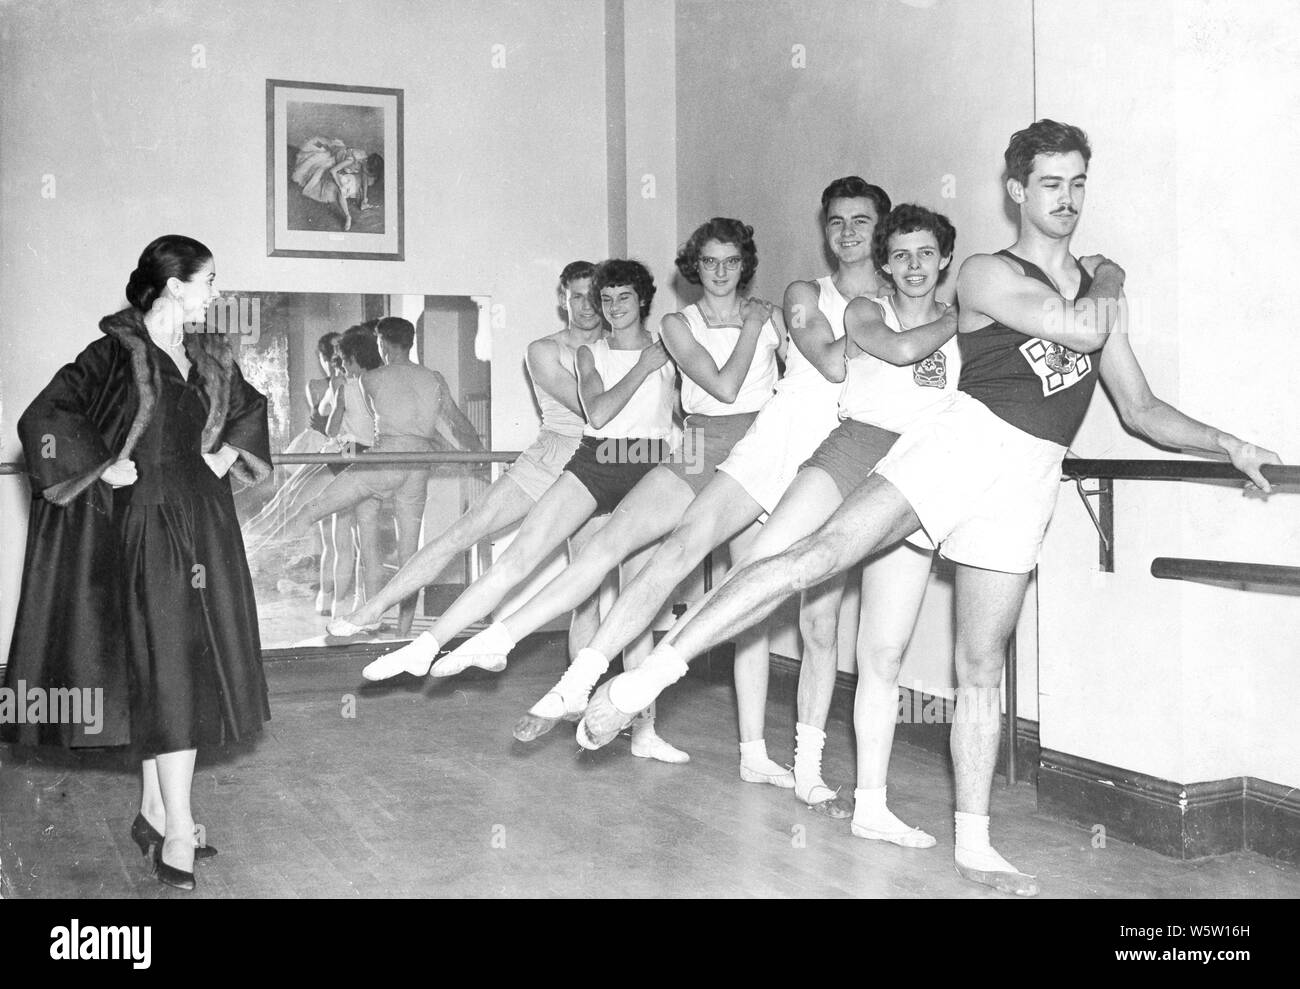 Photo Must Be Credited ©Alpha Press 050000 (1956) Dame Margot Fonteyn, President of the RAD, watches as some of the athletes show her what they have learnt about ballet during the pilot scheme which has been running for 1 month in 1956. L-R: Roy Frampton - a high jumper from Anerley, Jean Adamson - a hurdler from Croydon, Diana Cooper - a high jumper from Twickenham, Sandy Davies - a high jumper from Barnet, Edith Holland - a high jumper from Edgware, Roy Sutton - a hurdler from Horsley, Surrey. Stock Photo